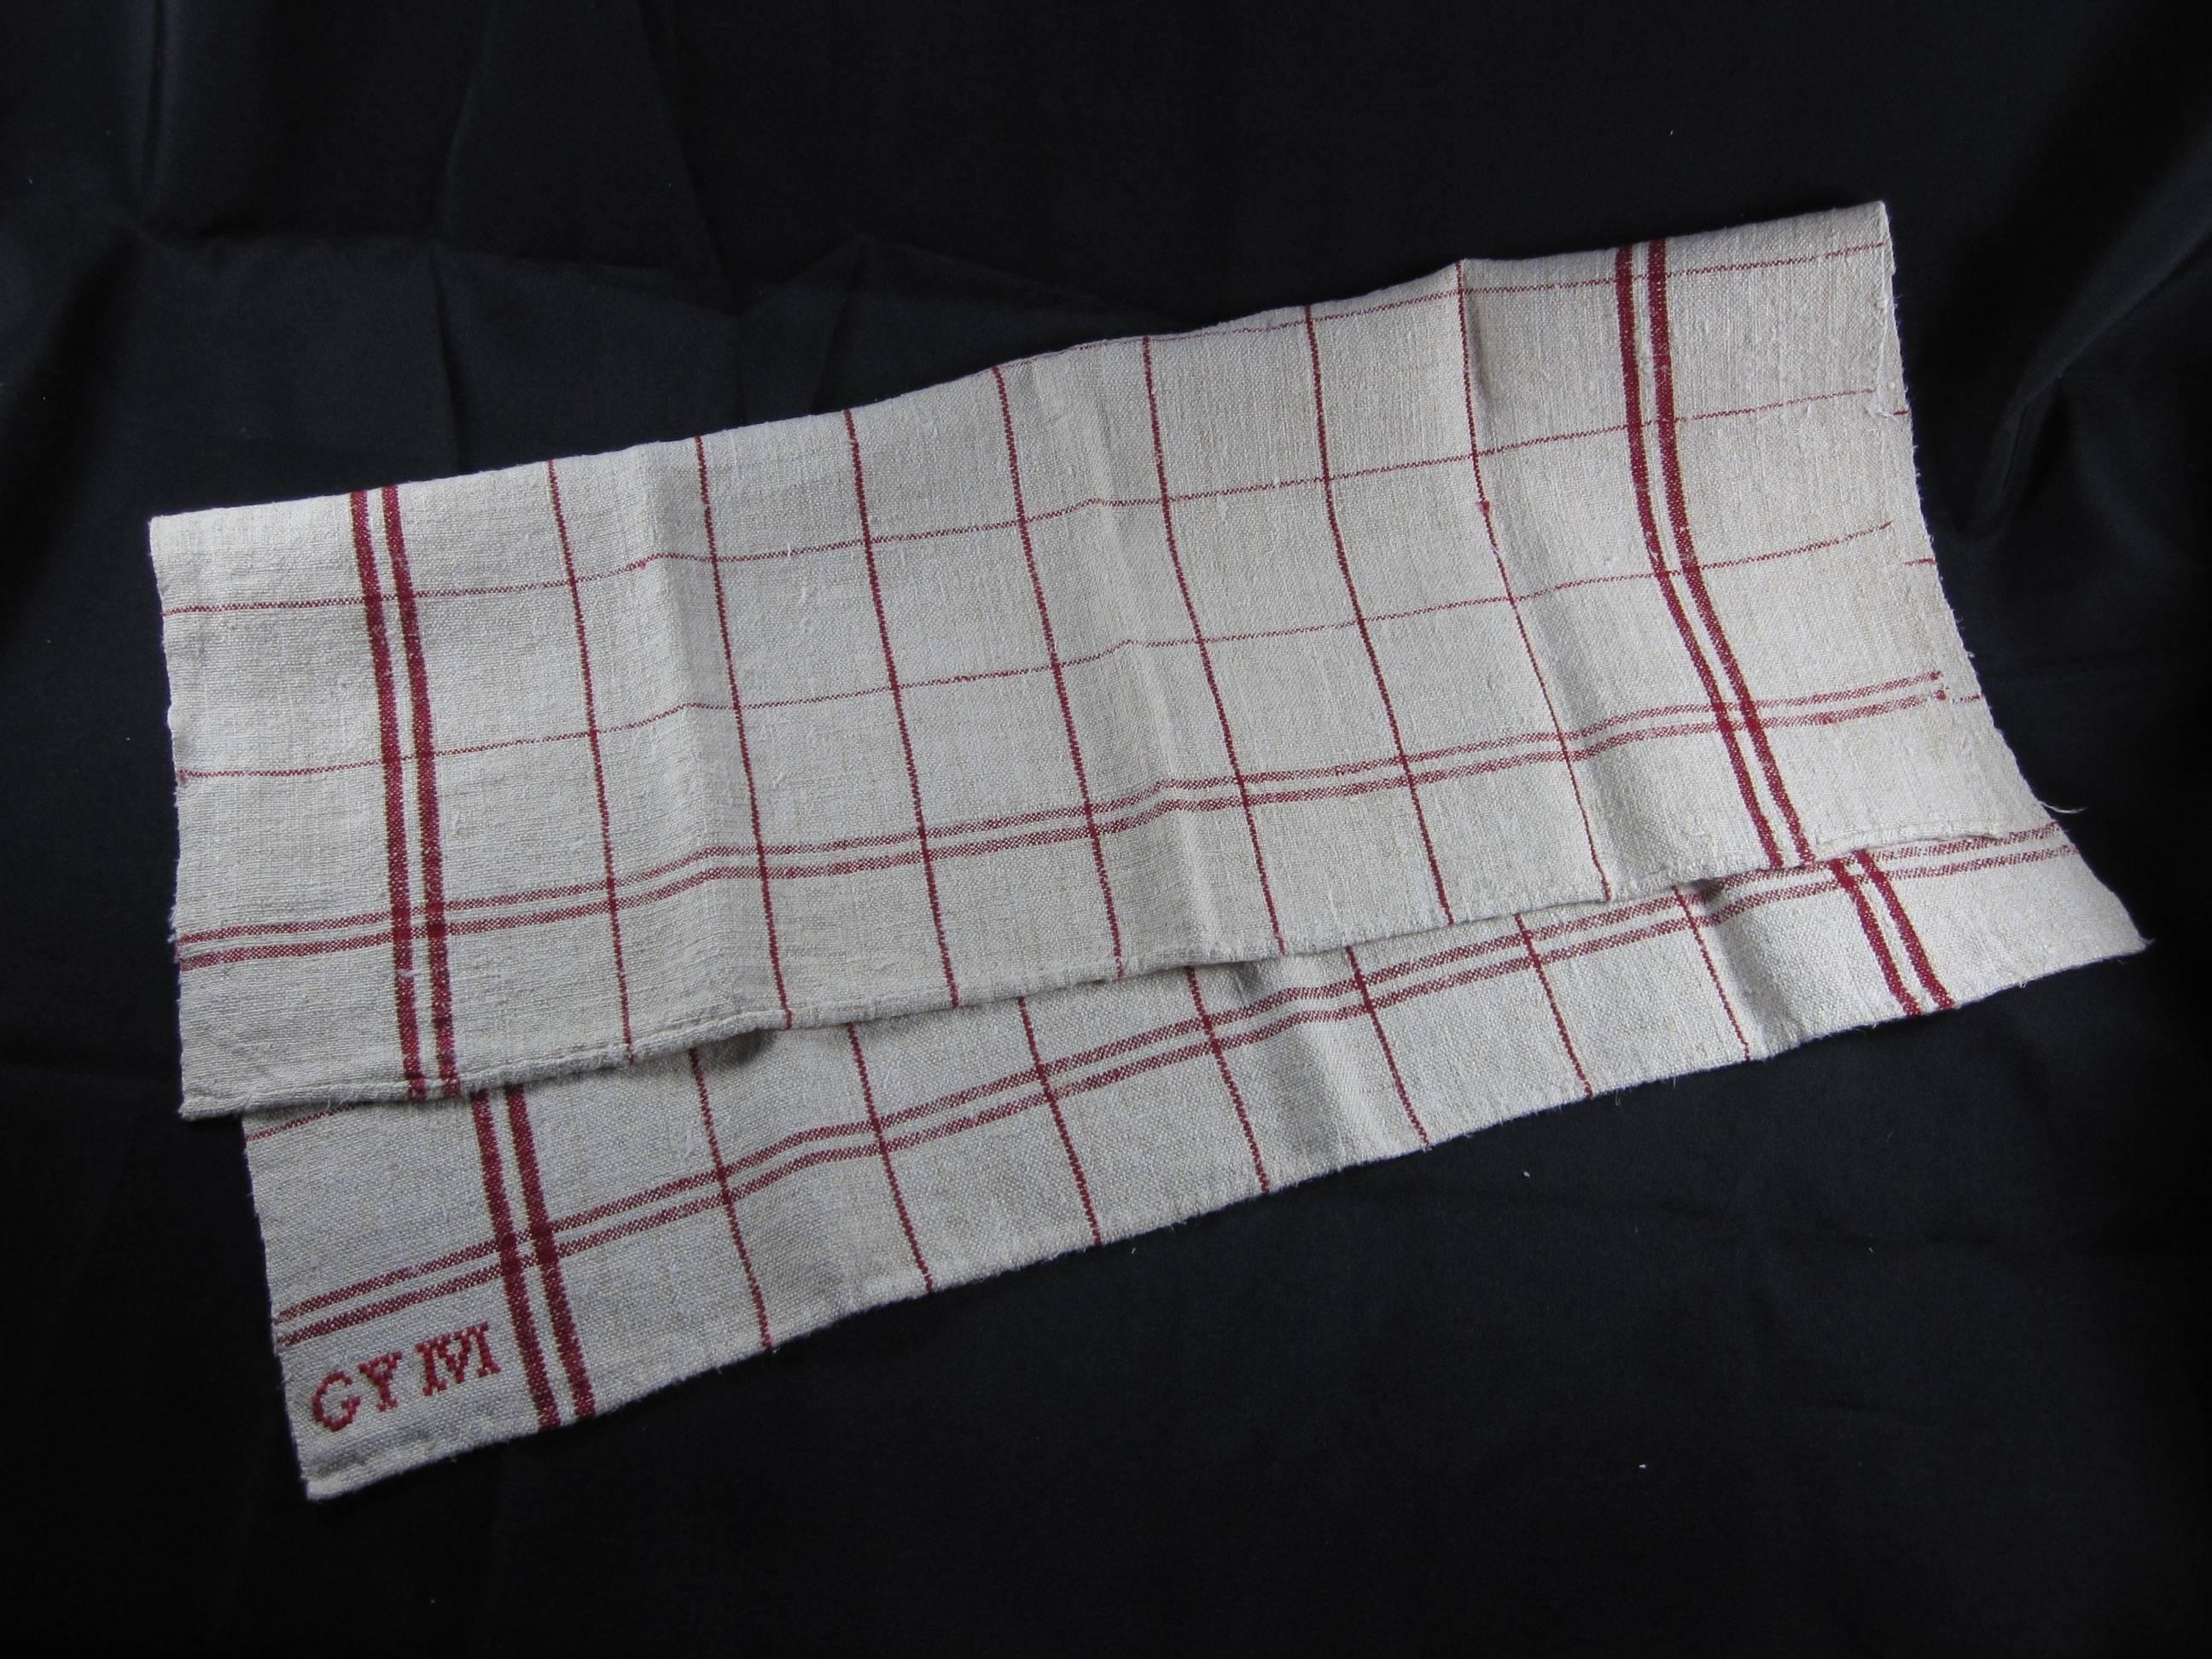 Found in a Provençal Brocante in France, a set of six rustic, vintage, hand-spun kitchen torchons or towels with red stripes on natural linen and embroidered with the initials, GYM. Hand stitched hems, freshly laundered and starched. 

Wonderful